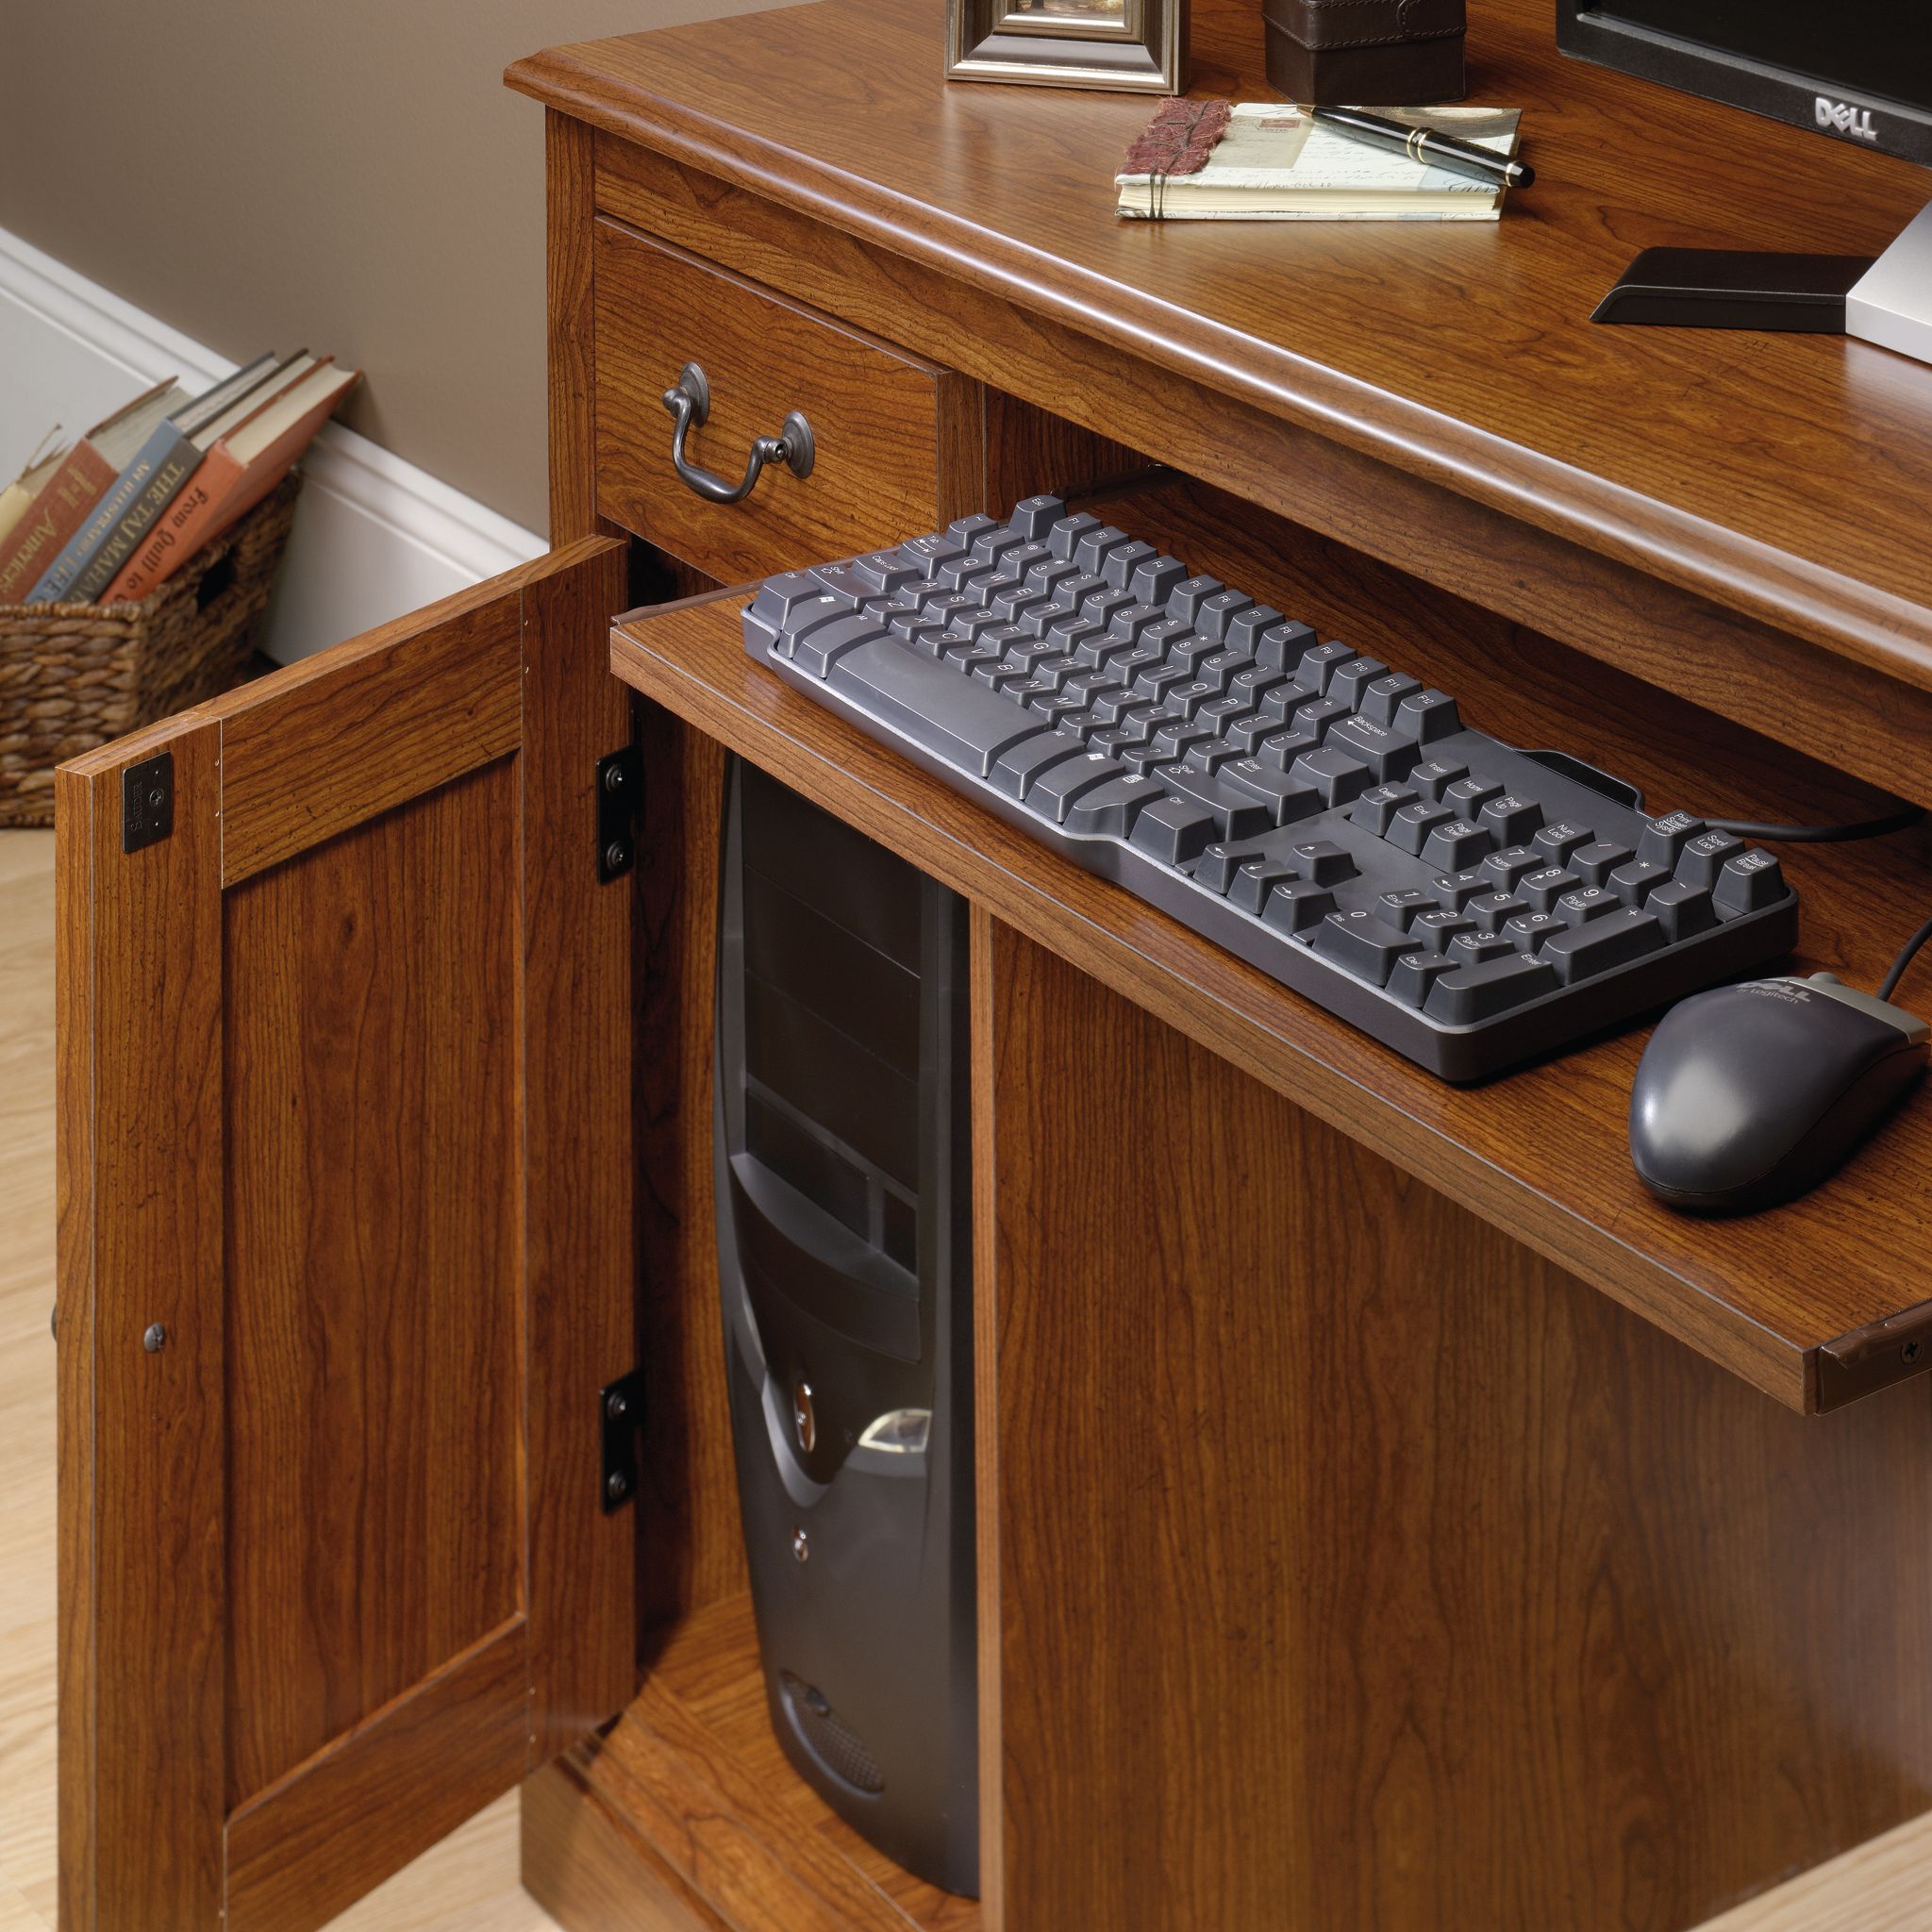 Sauder Camden County Computer Desk w/Hutch, Planked Cherry Finish - image 4 of 6